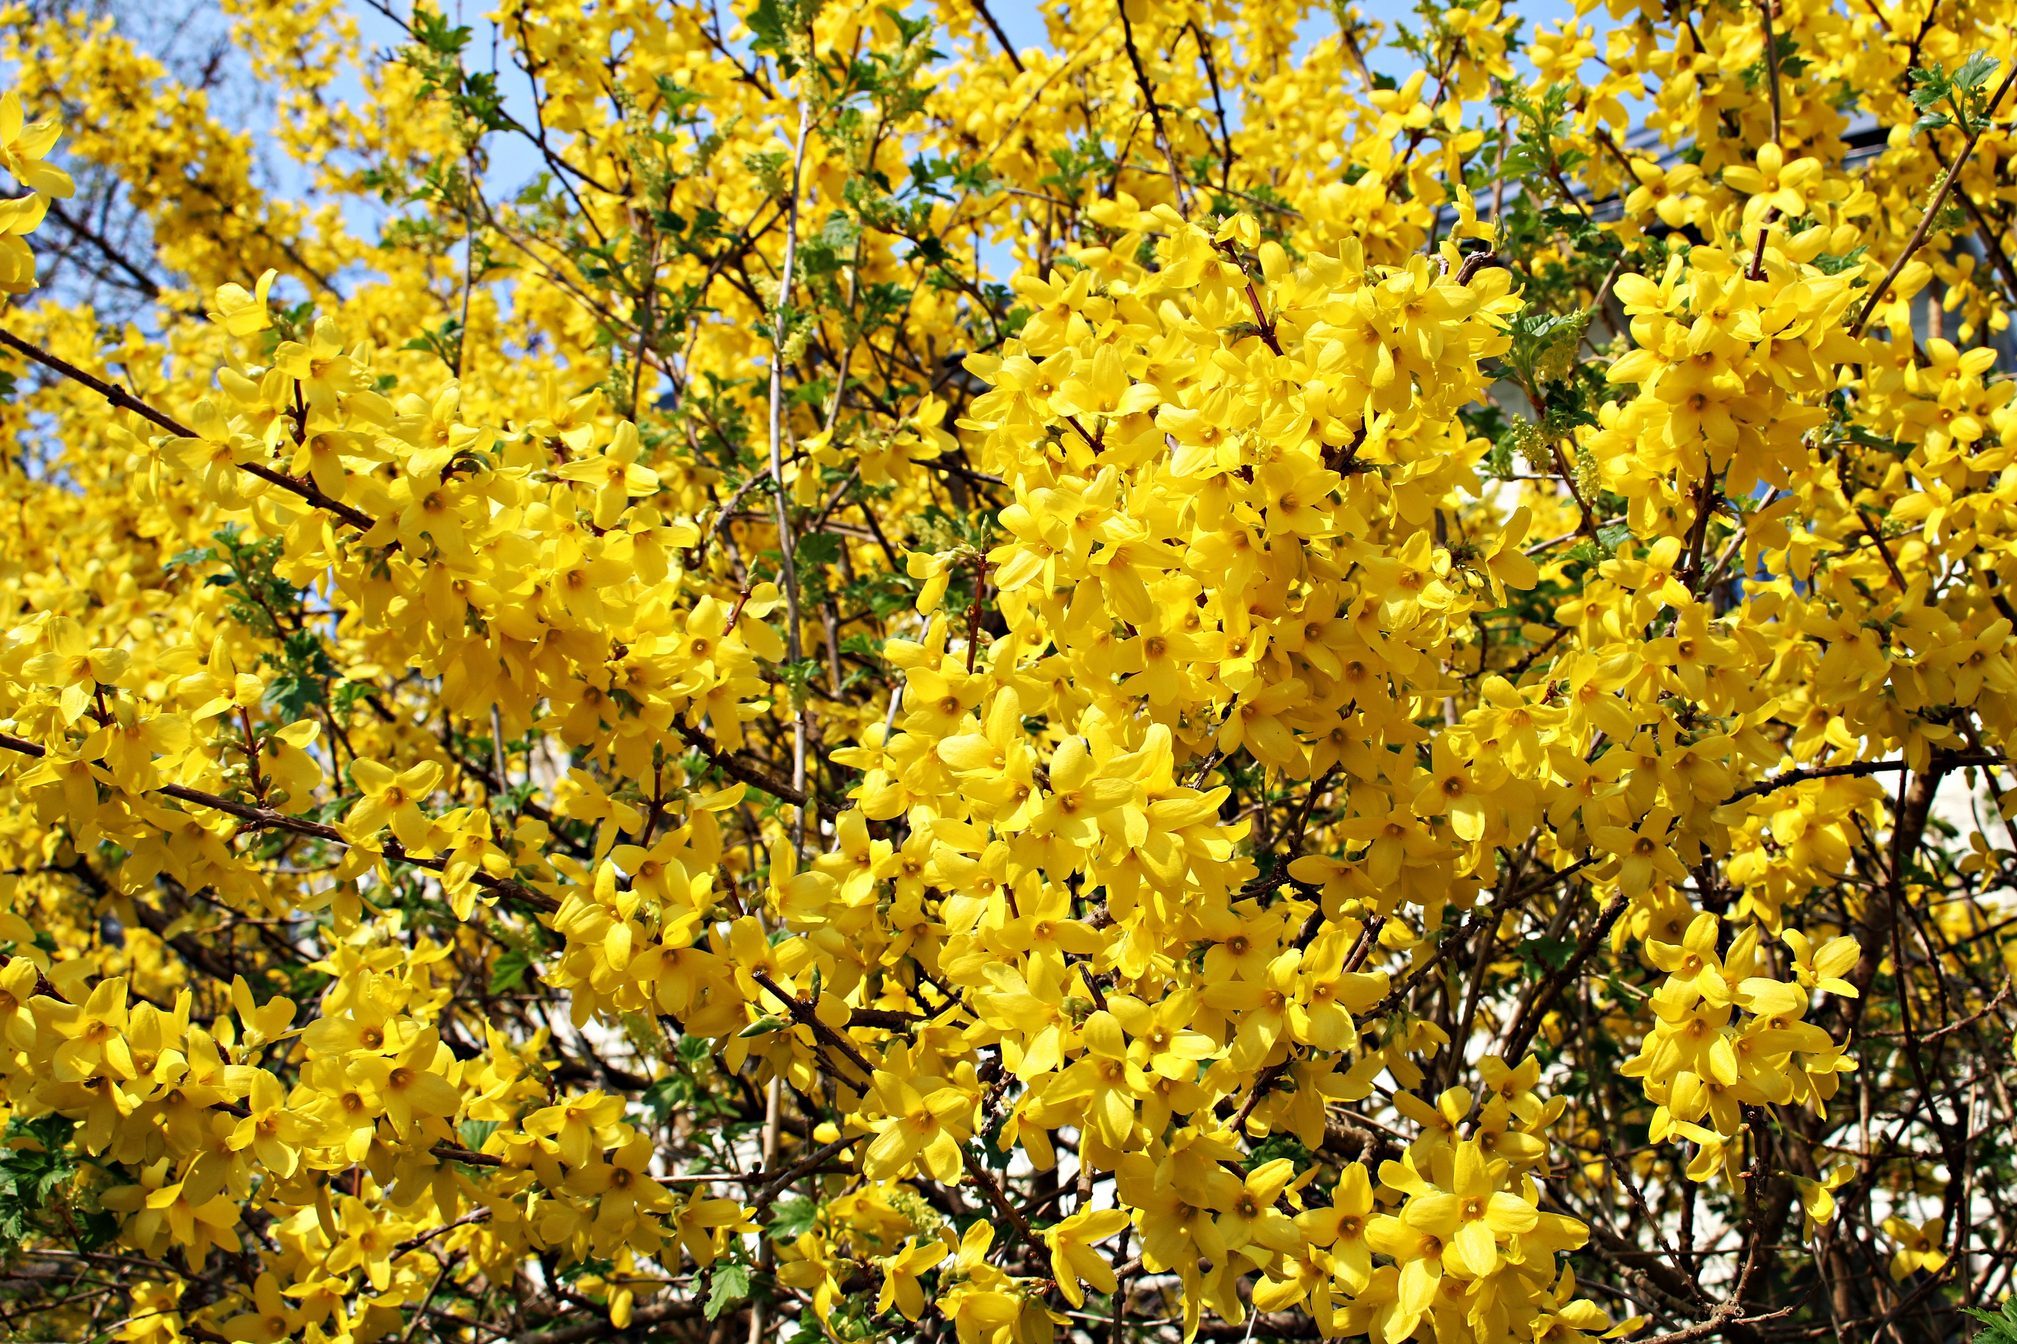 Forsythia bushes in city parks and streets bloomed with beautiful yellow flowers in spring